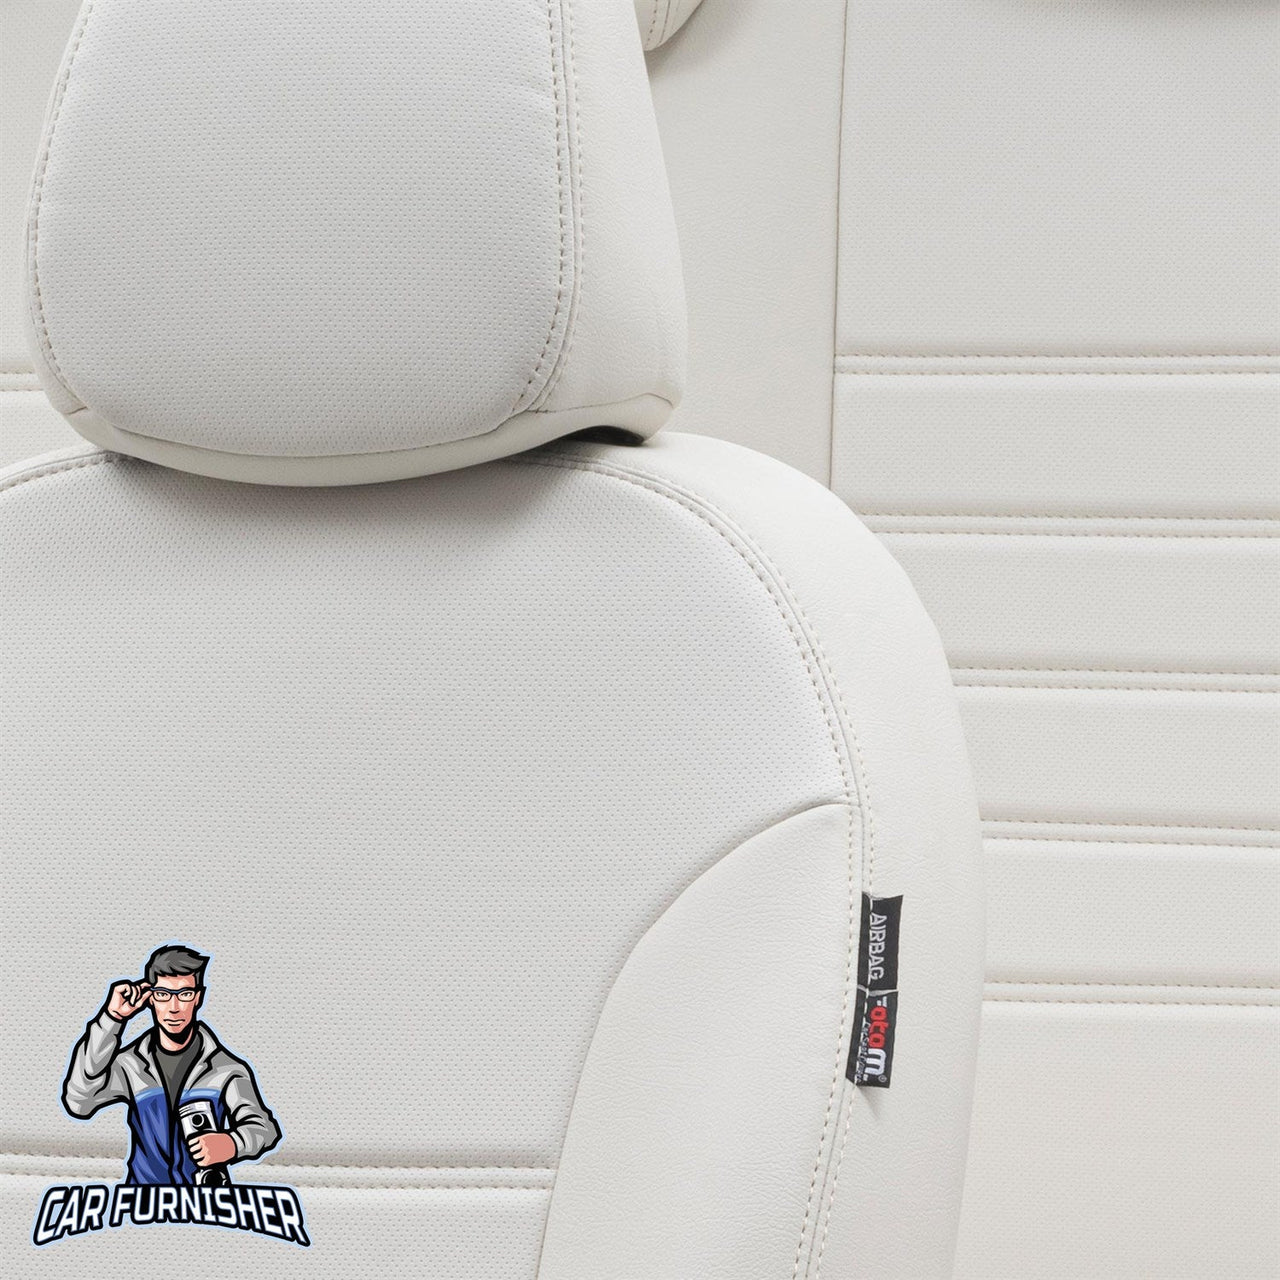 Mercedes Sprinter Seat Covers Istanbul Leather Design Ivory Leather